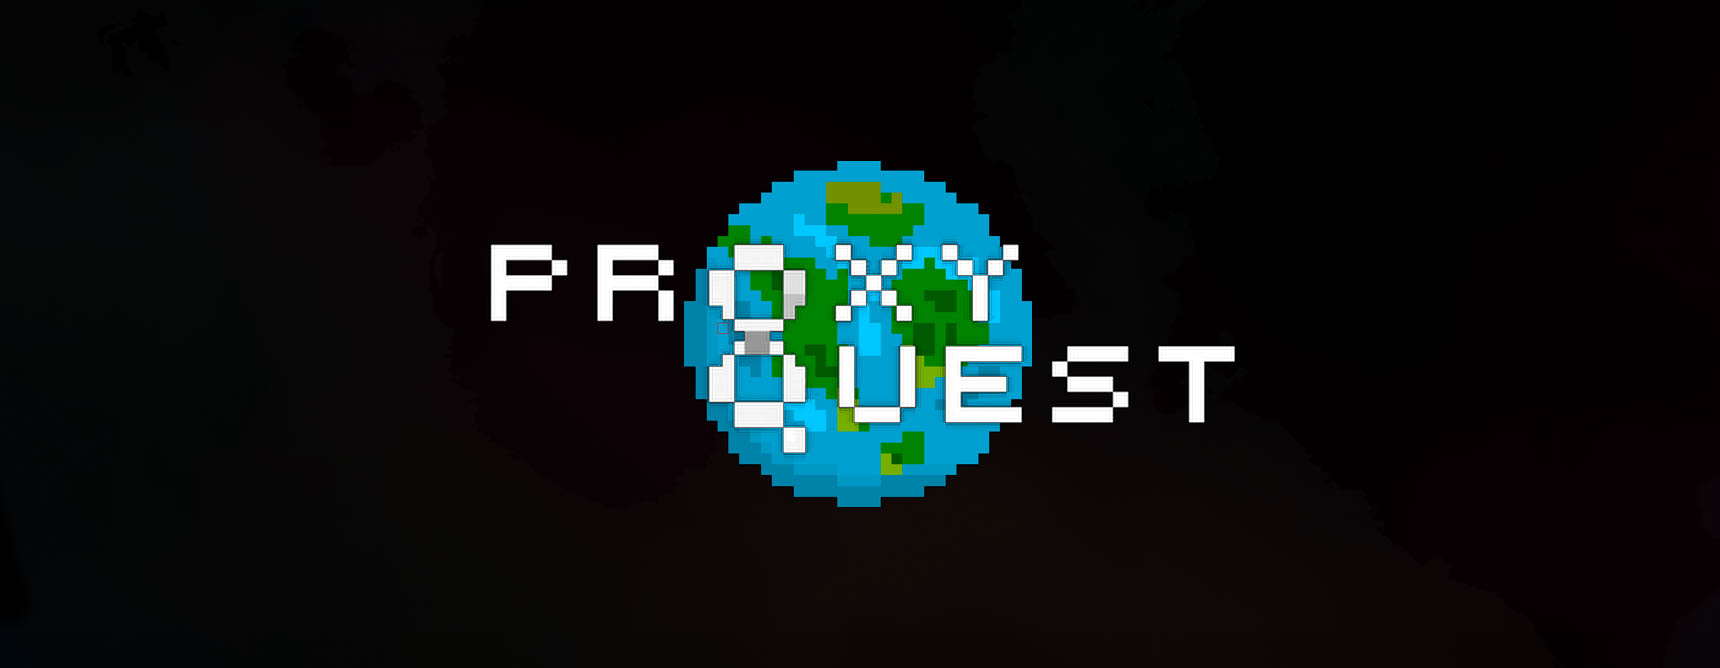 Proxy Quest